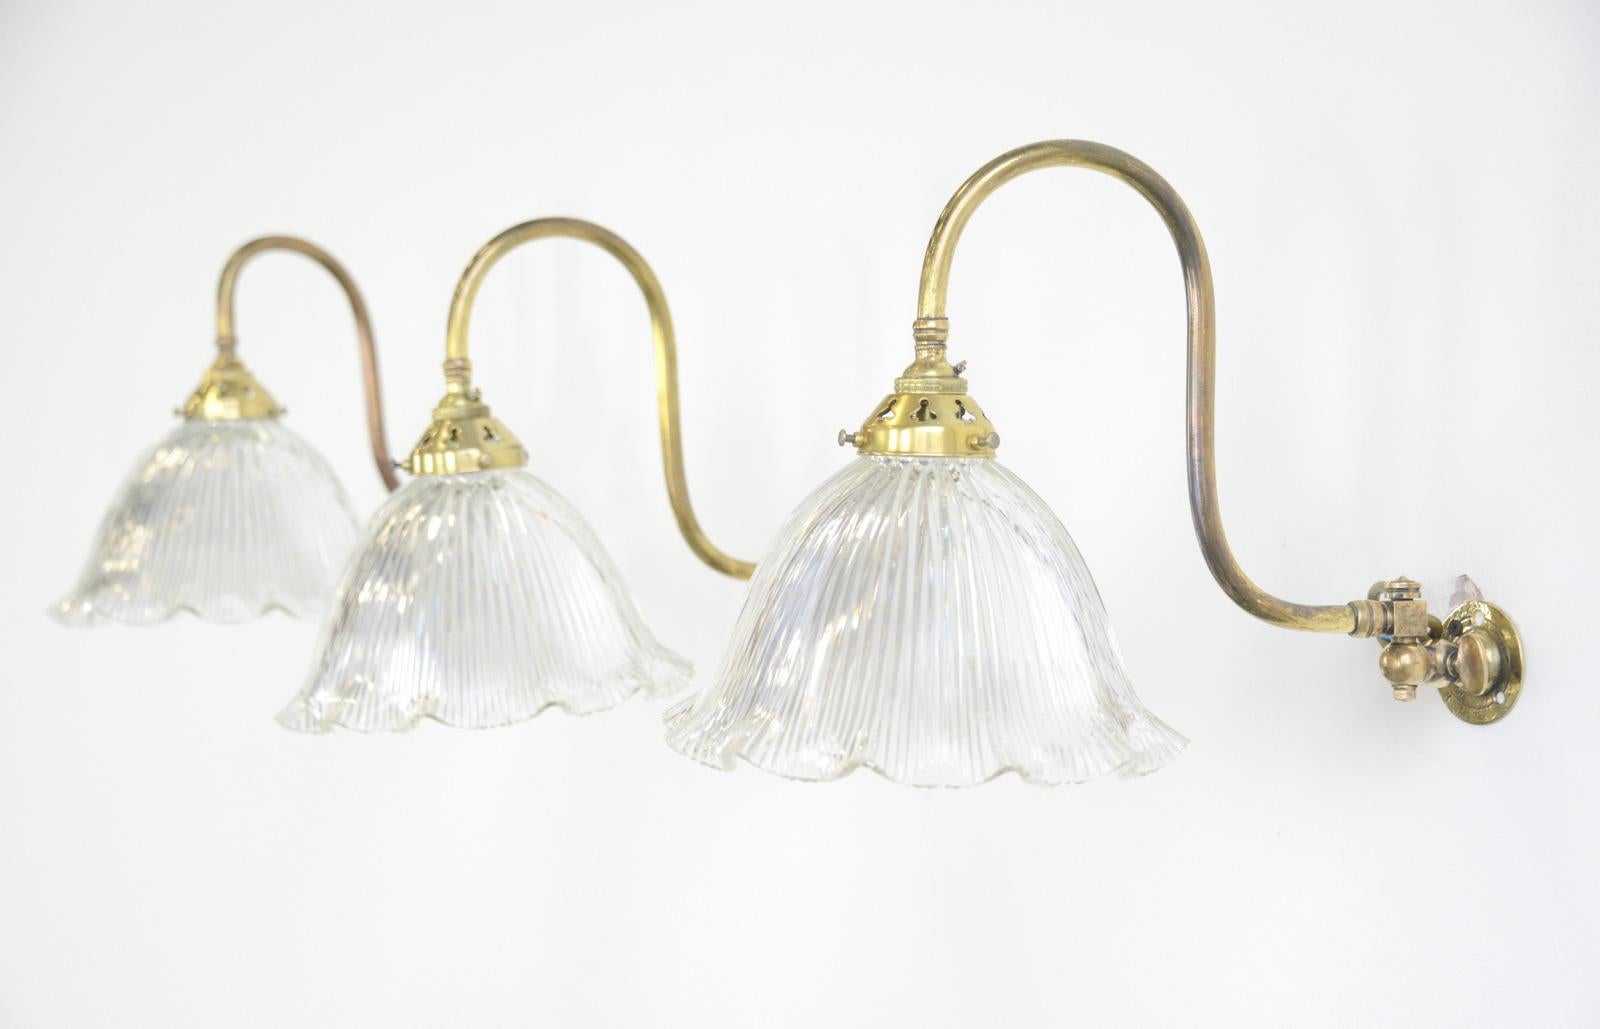 English Articulated Wall Sconces by Holophane, circa 1910